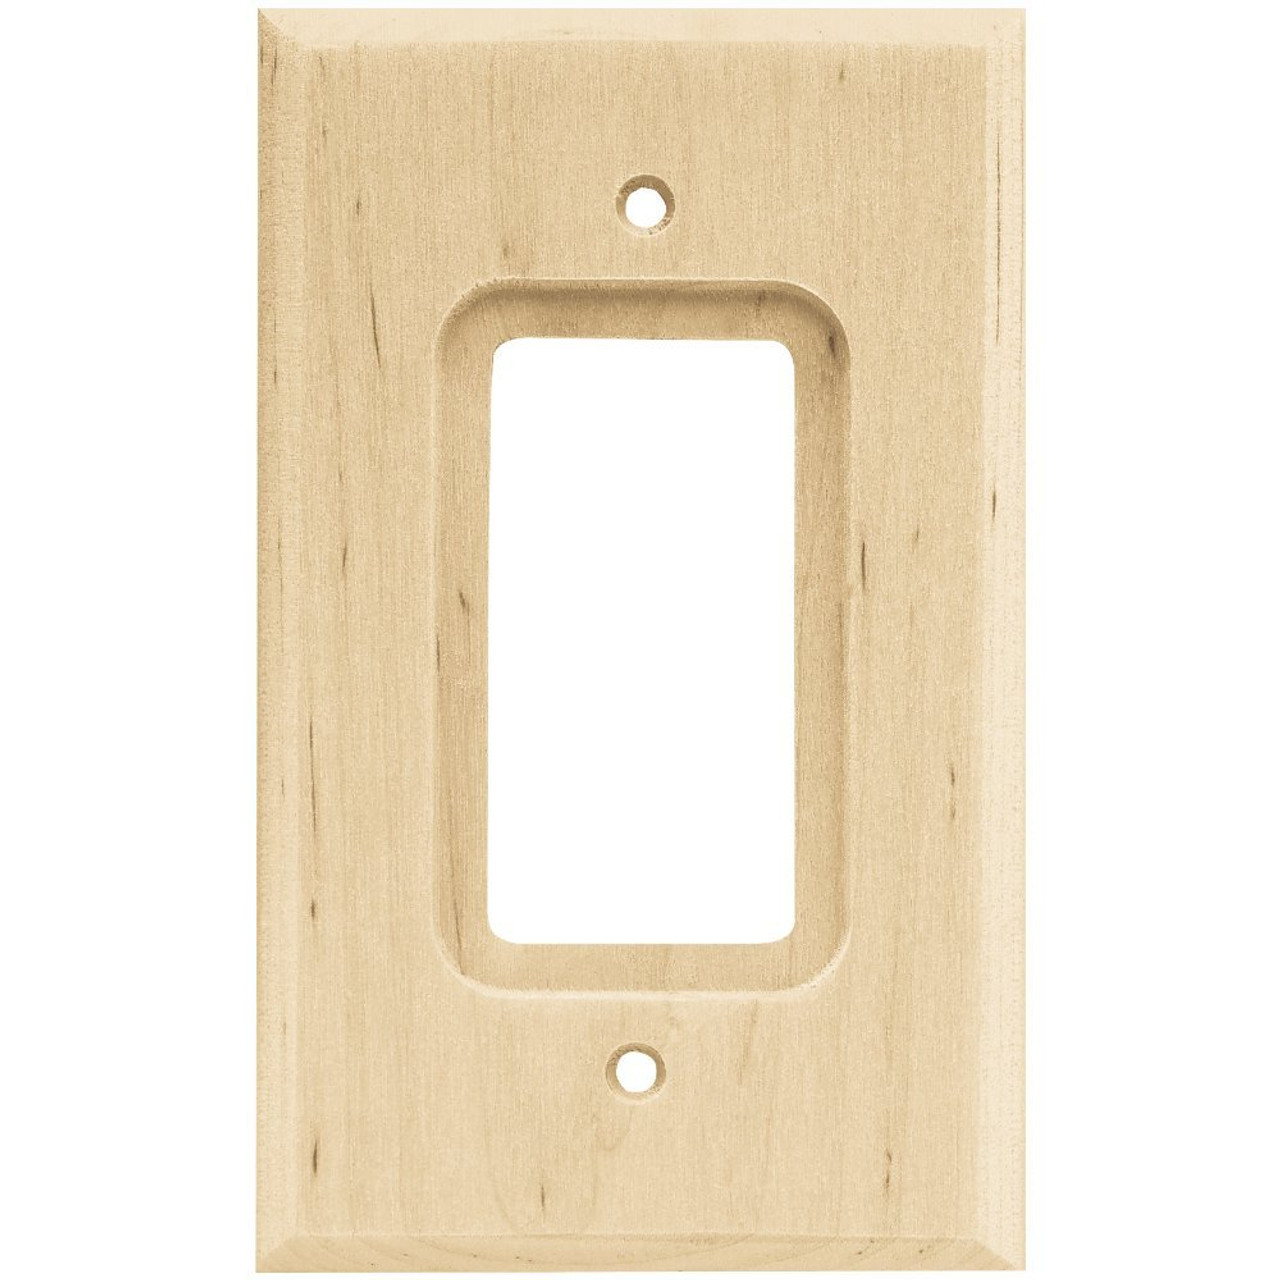 Franklin Brass W10399-UN Unfinished Wood Single GFCI Cover Wall Plate